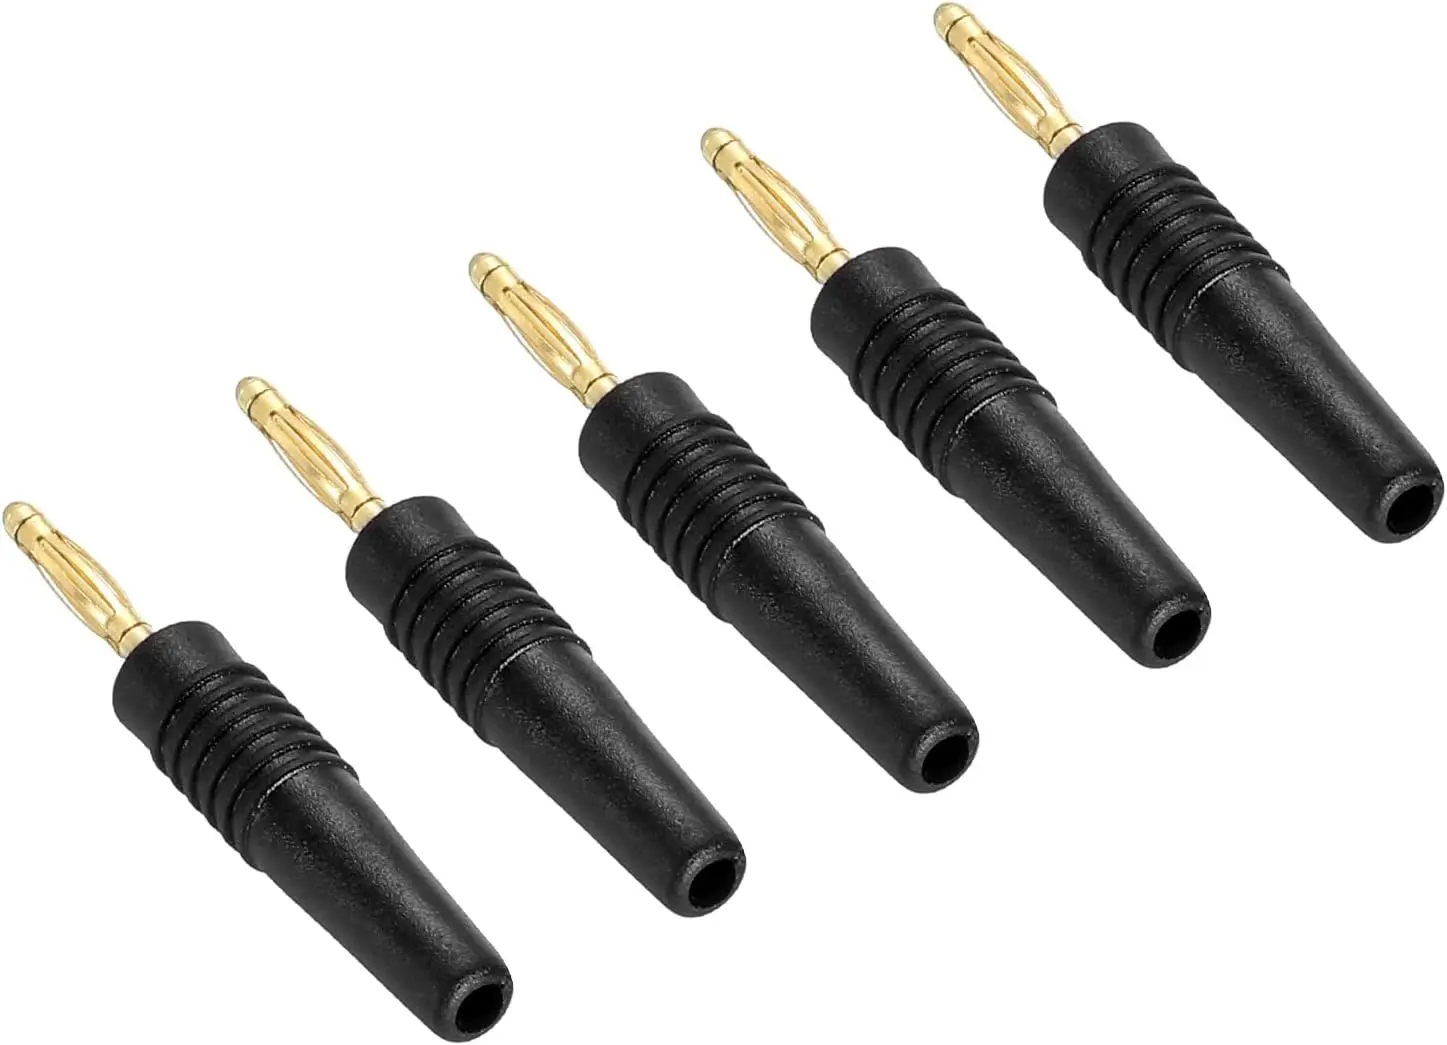 

5 Pack Banana Plugs Connector Solder Type Speaker Banana Plugs 2mm Gold-Plated Copper Black for Speaker Wires